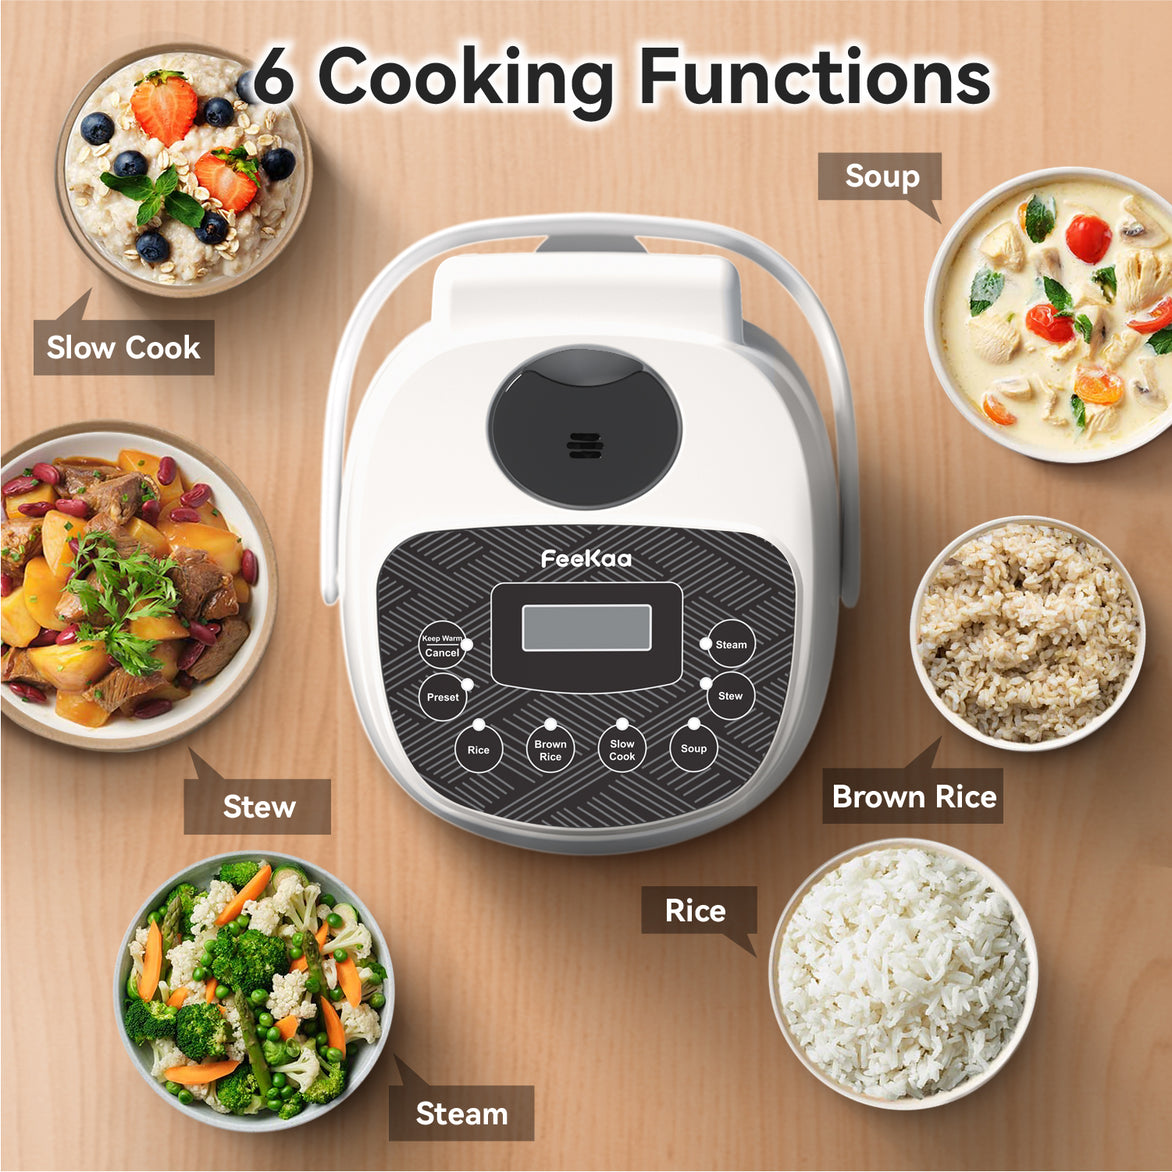 Portable Mini Rice Cooker for Travel - Stainless Steel Inner Pot,  Multi-Function Design, Low Carb